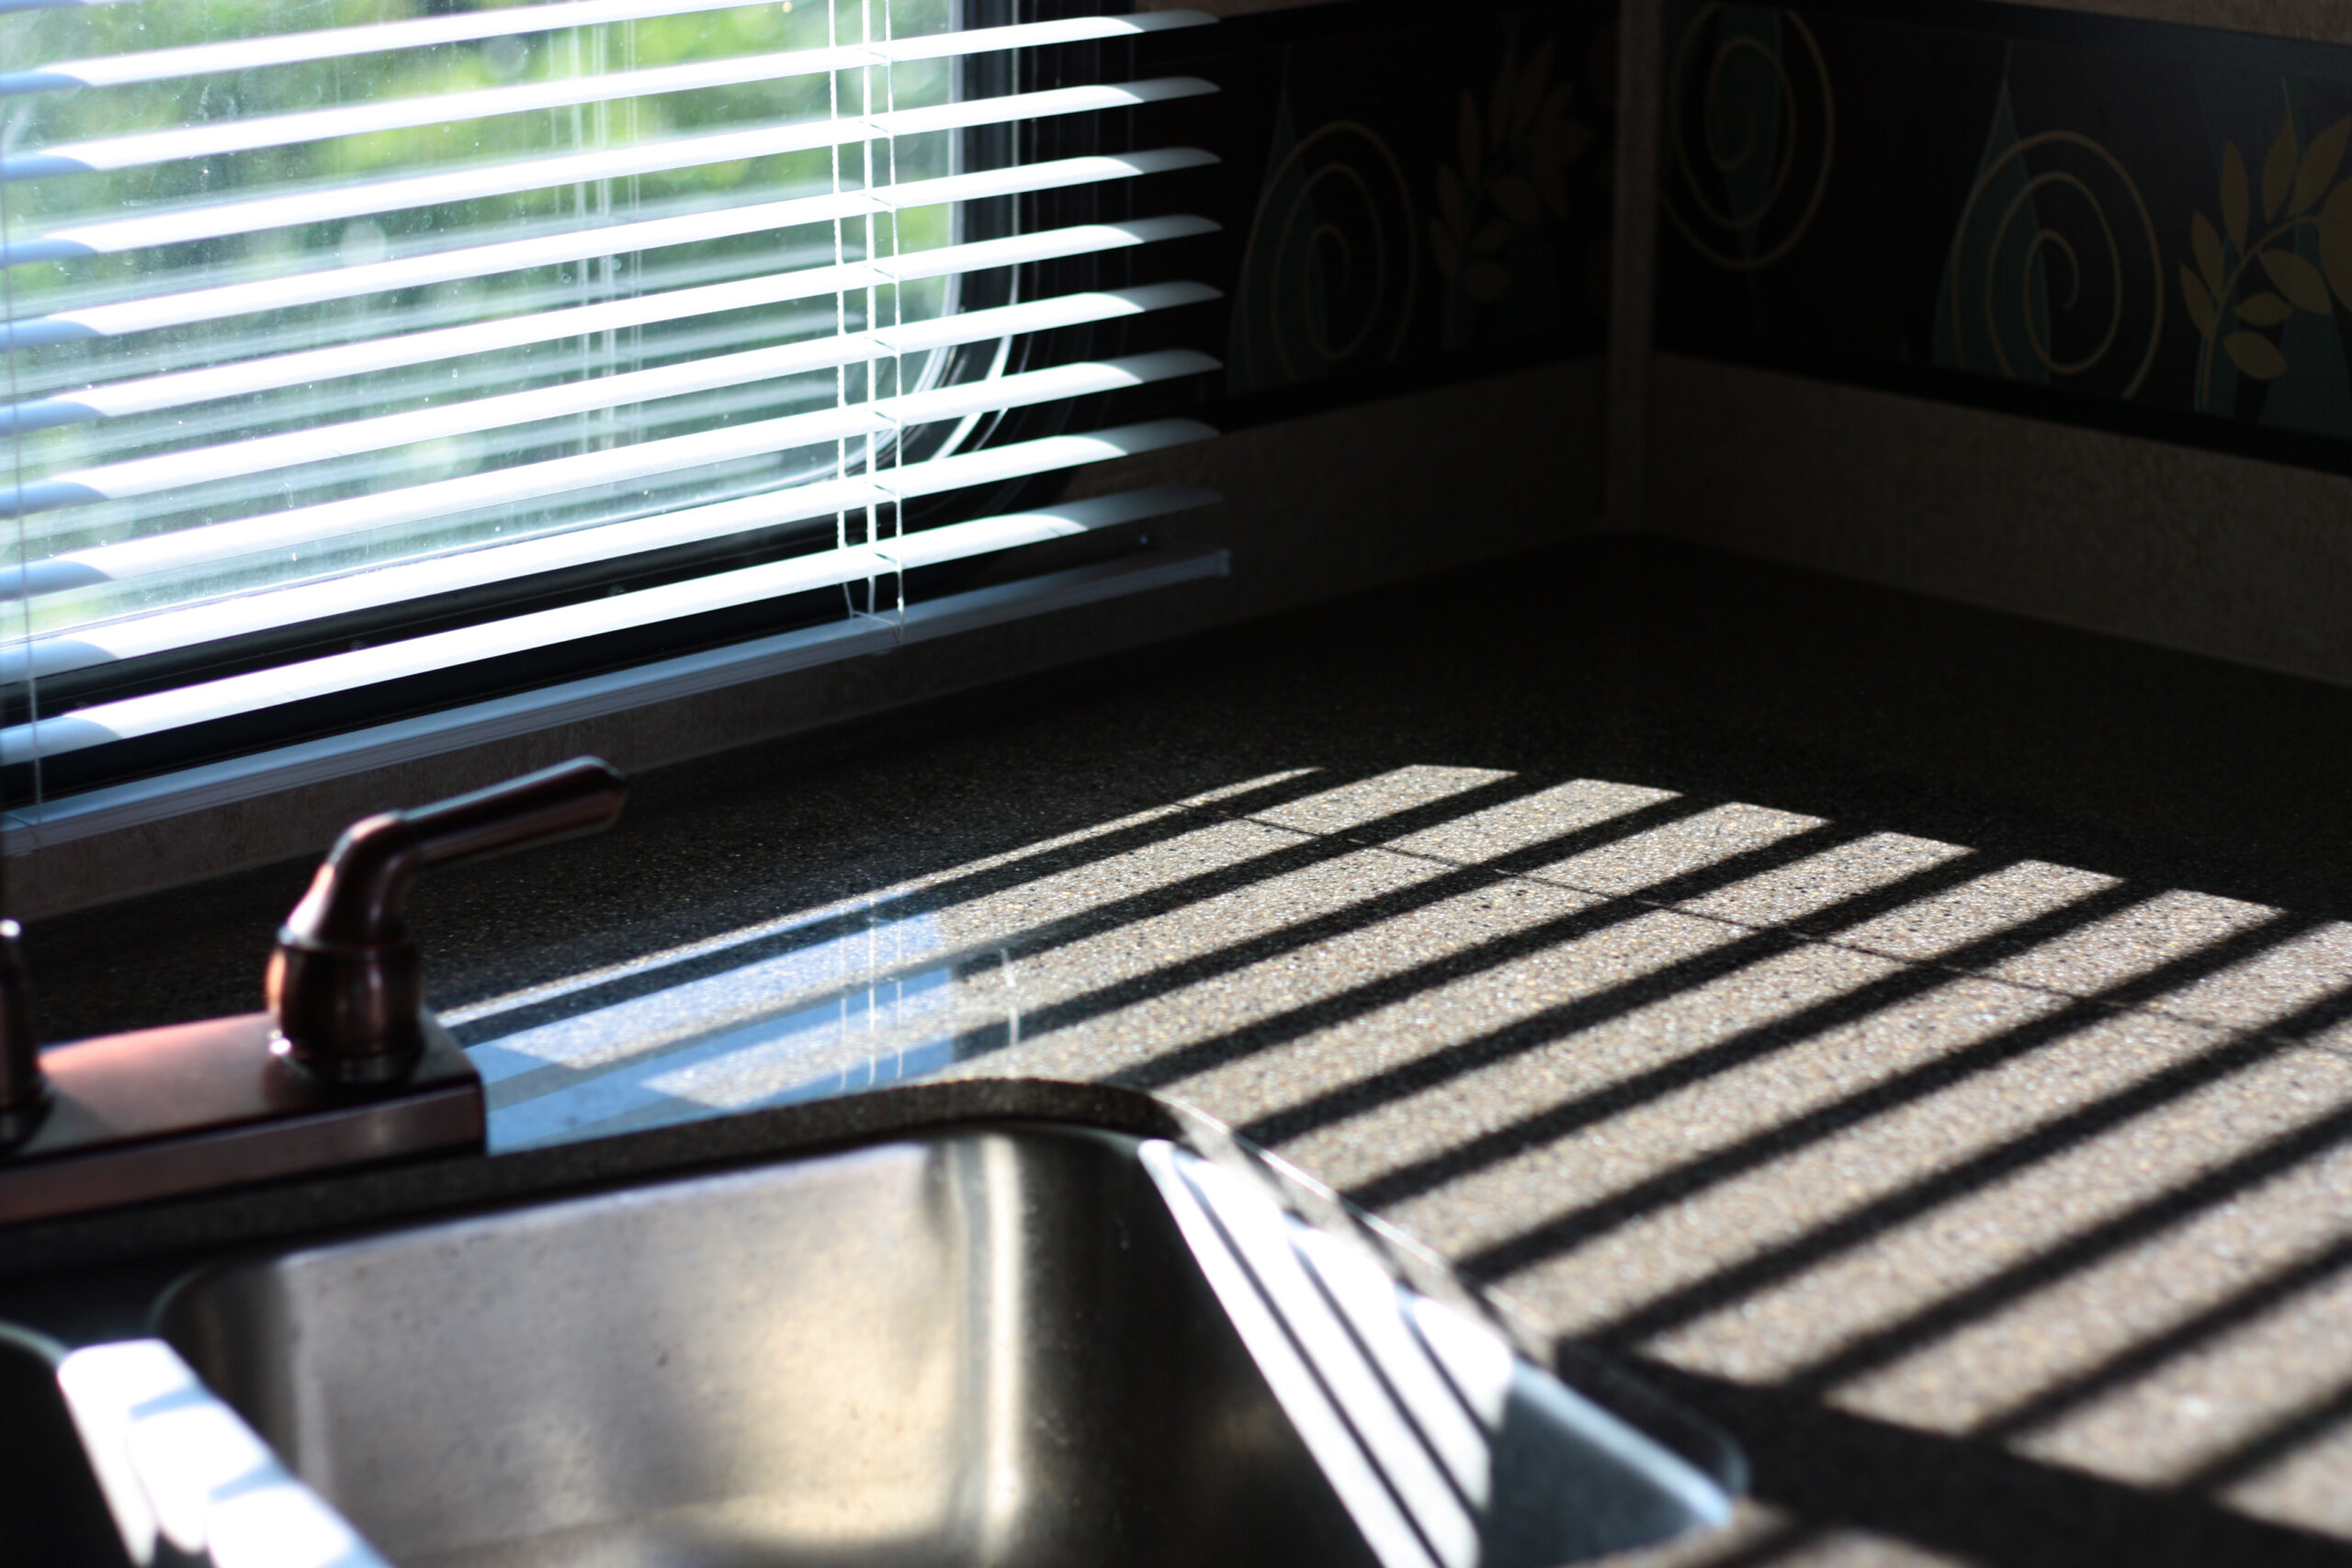 sunlight through blinds on kitchen counter - feature image for How To Fix RV Blinds